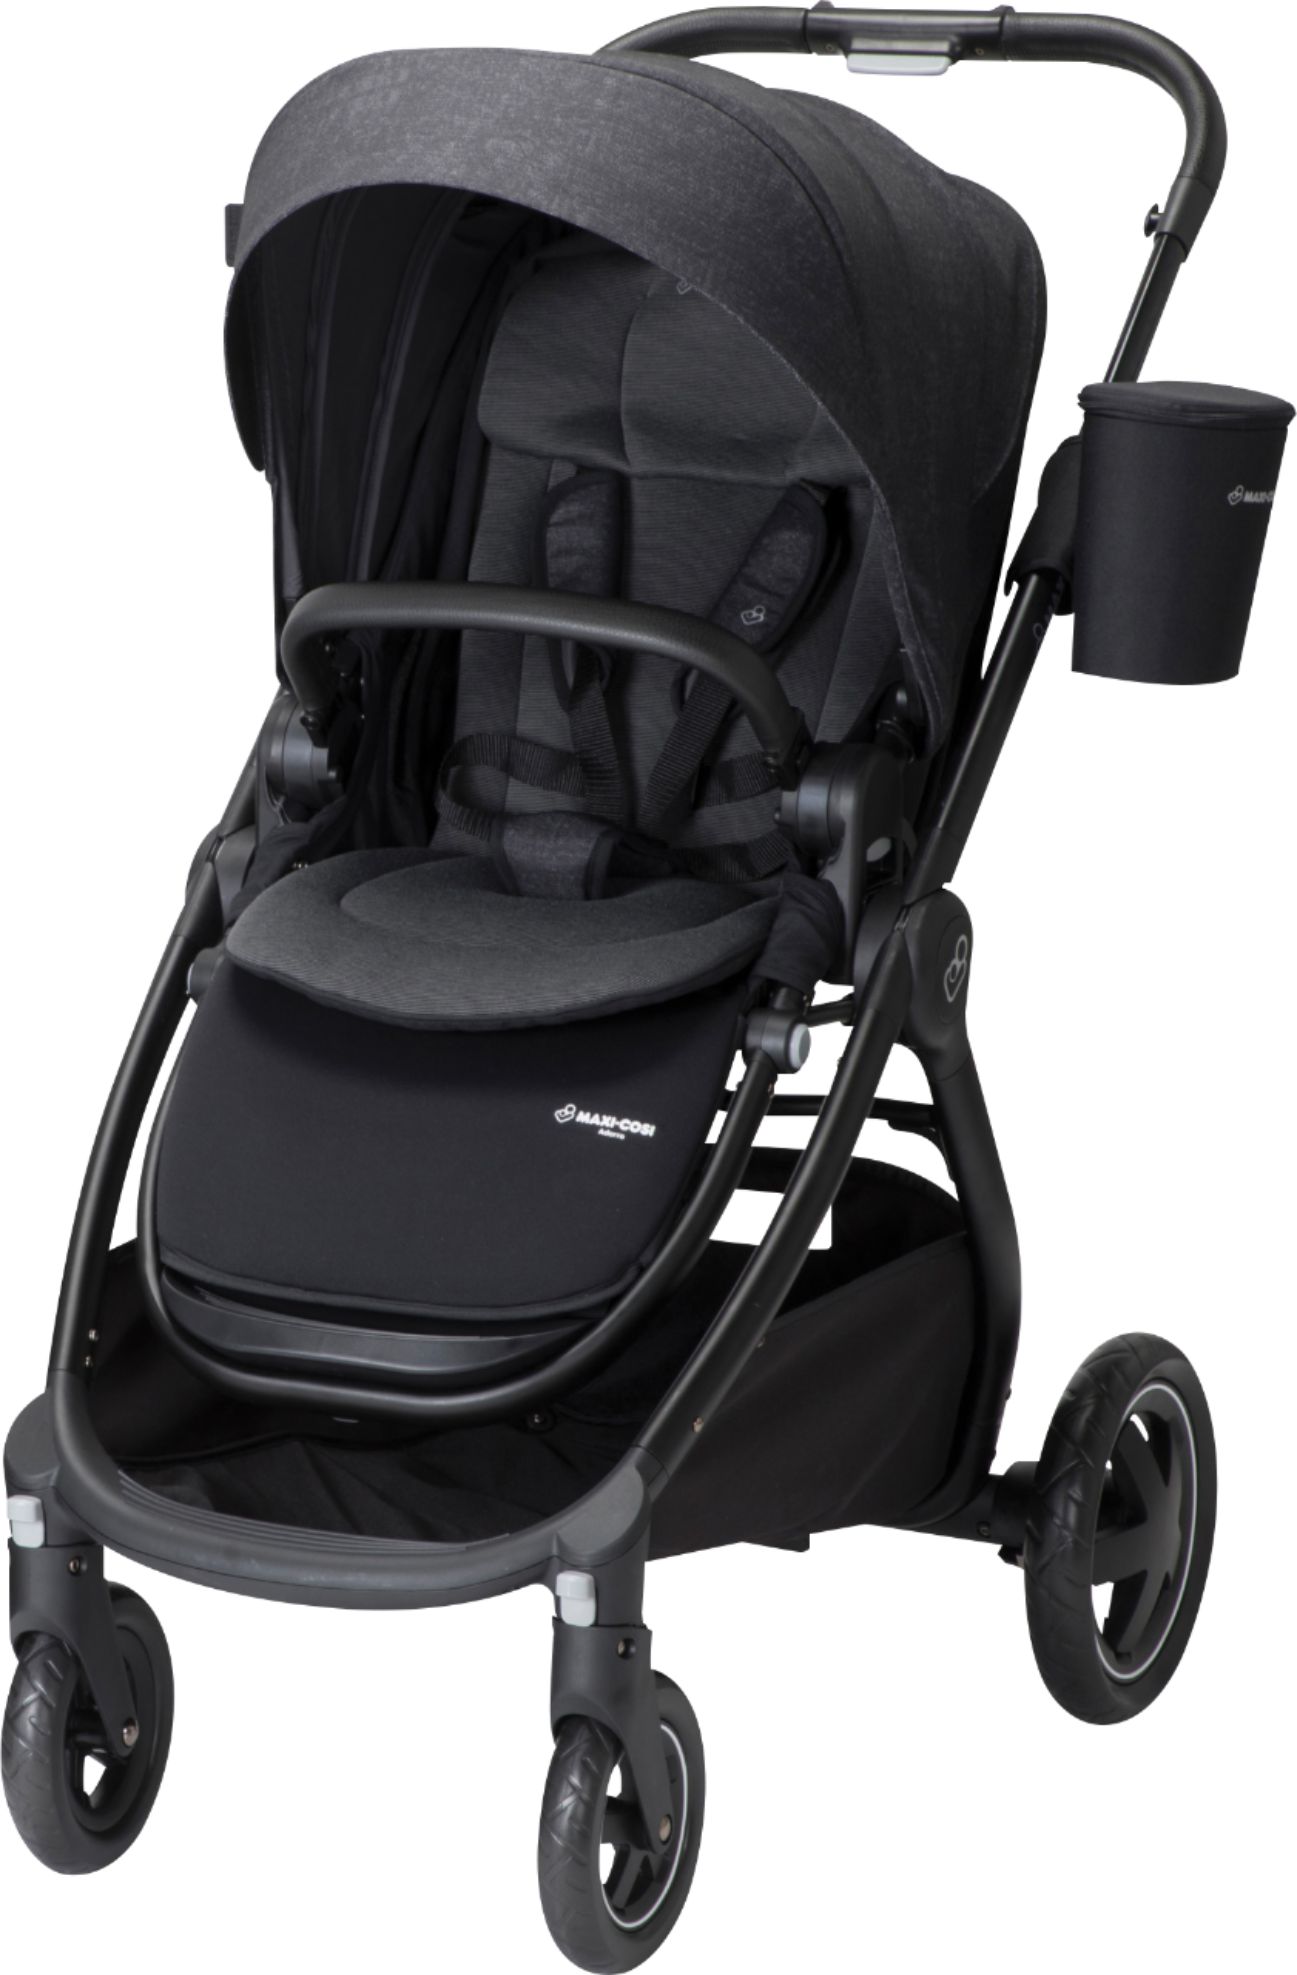 prams compatible with maxi cosi car seat